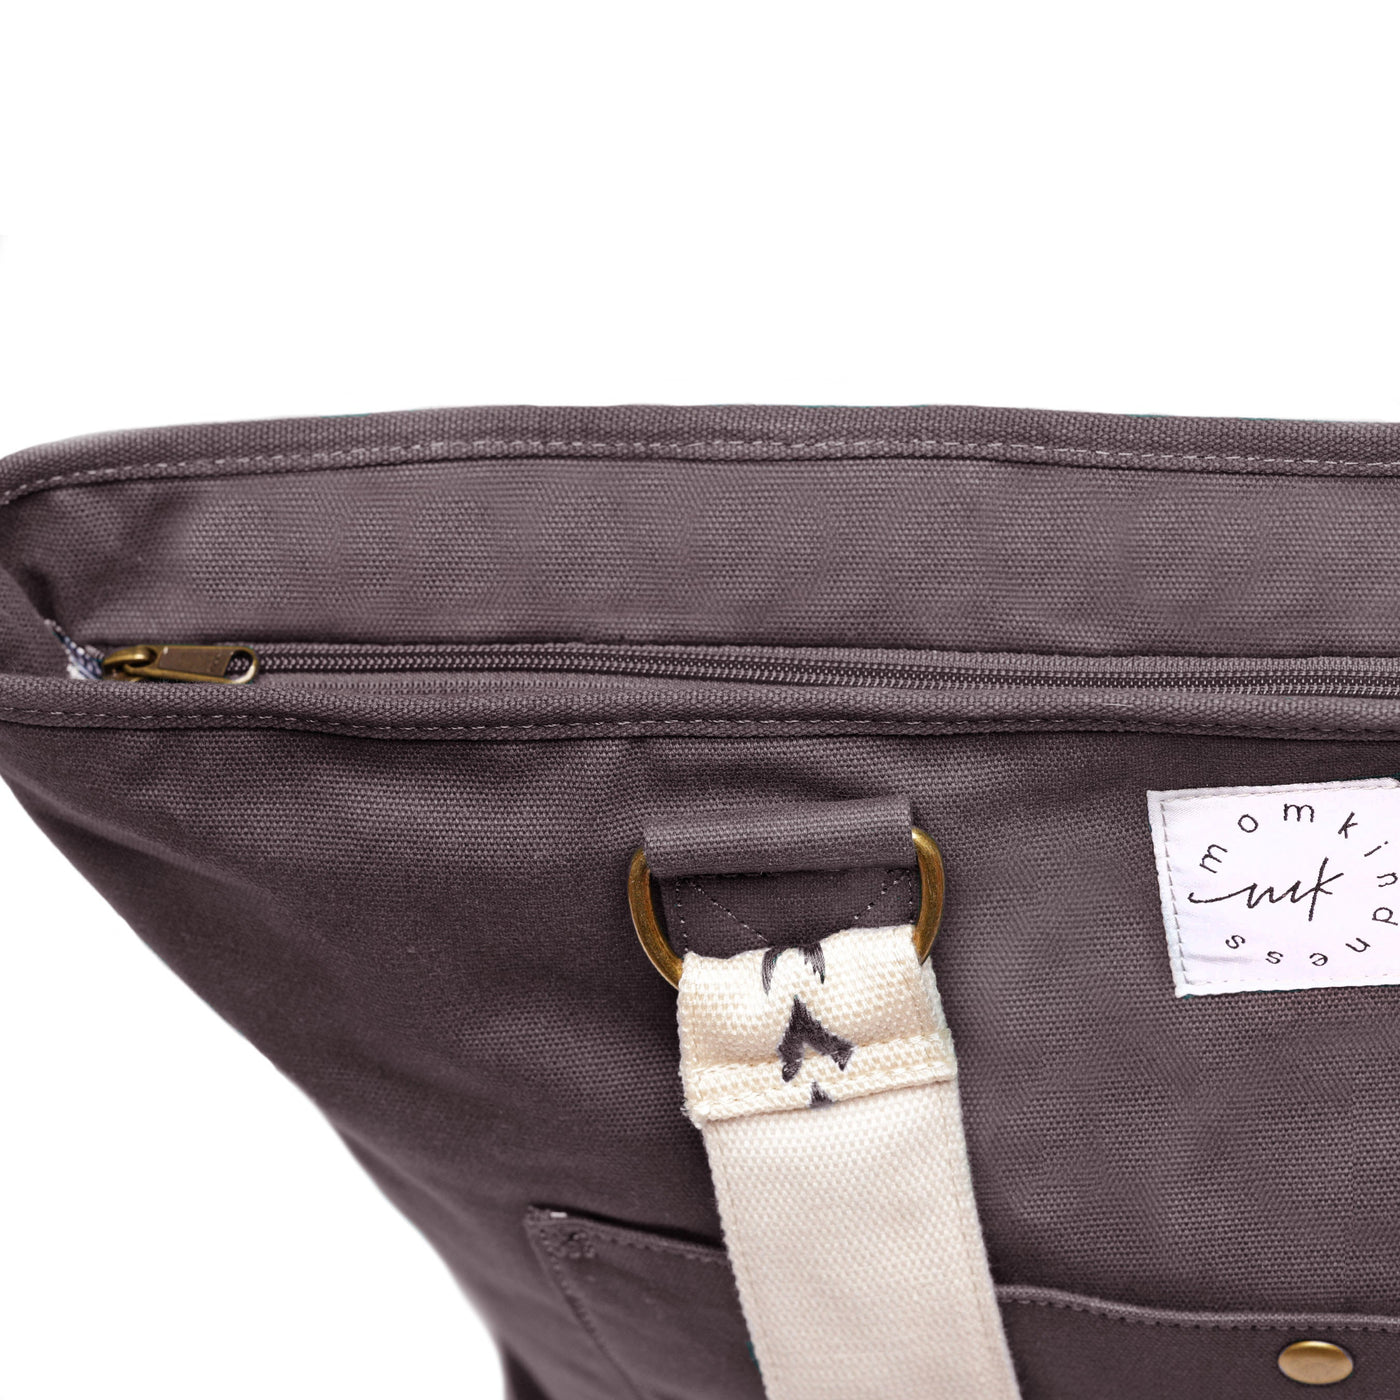 A close-up of the zipper-top panel of an extra-roomy canvas weekender tote in a graphite color with ivory embroidered shoulder straps with an arrow pattern, shown on a white background.